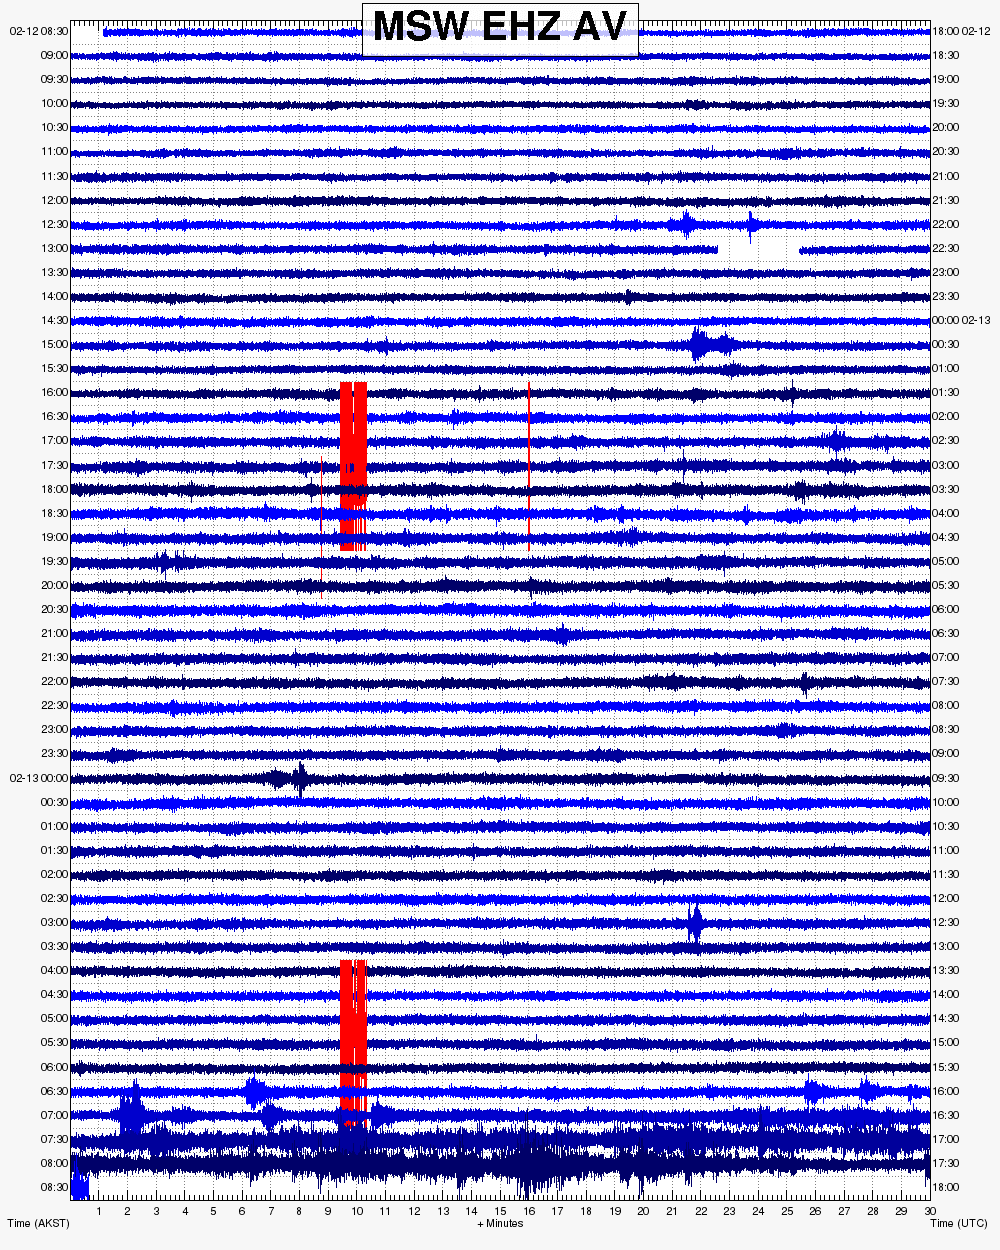 Seismic signal from Bogoslof volcano, MSW station (on Makushin 60 km to the east from Bogoslof)